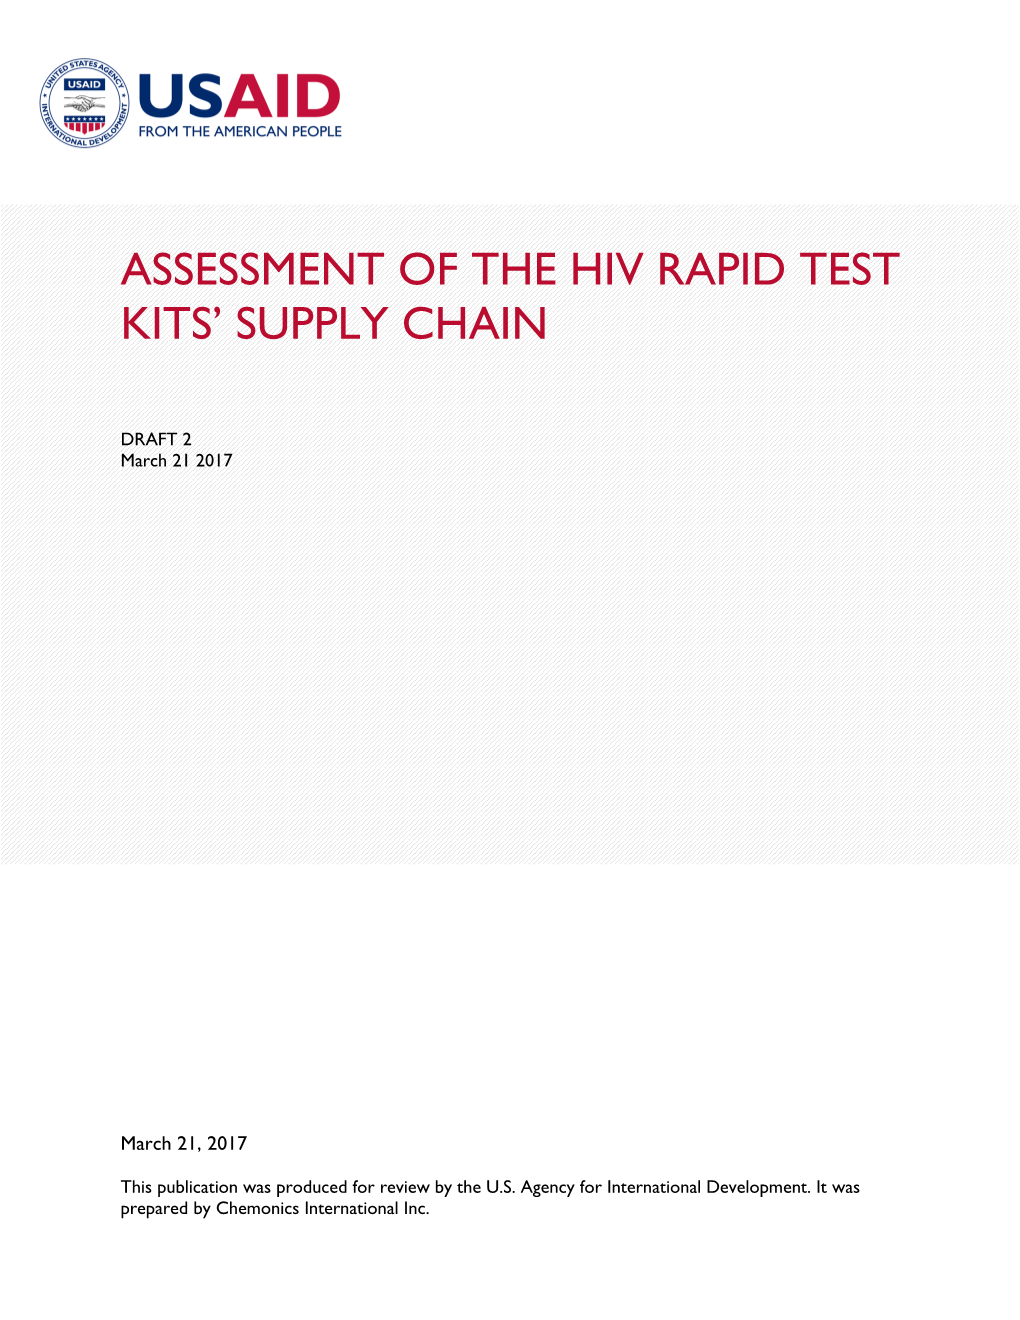 Assessment of the Hiv Rapid Test Kits' Supply Chain